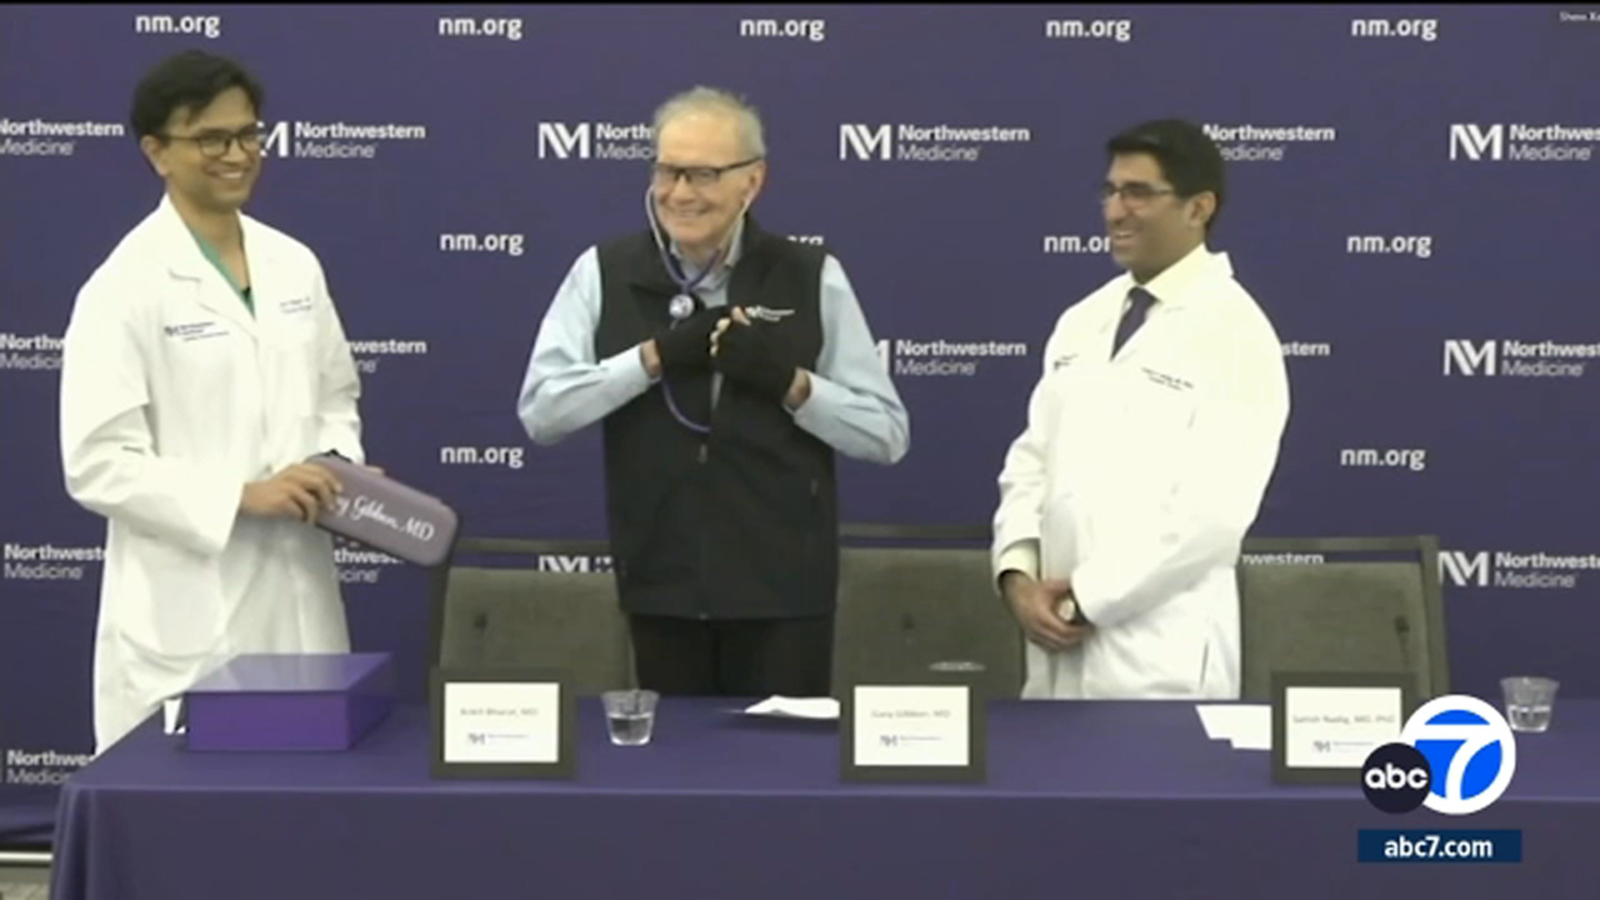 Doctor with lung cancer gets unprecedented liver, double-lung transplant from Northwestern hospital Chicago [Video]